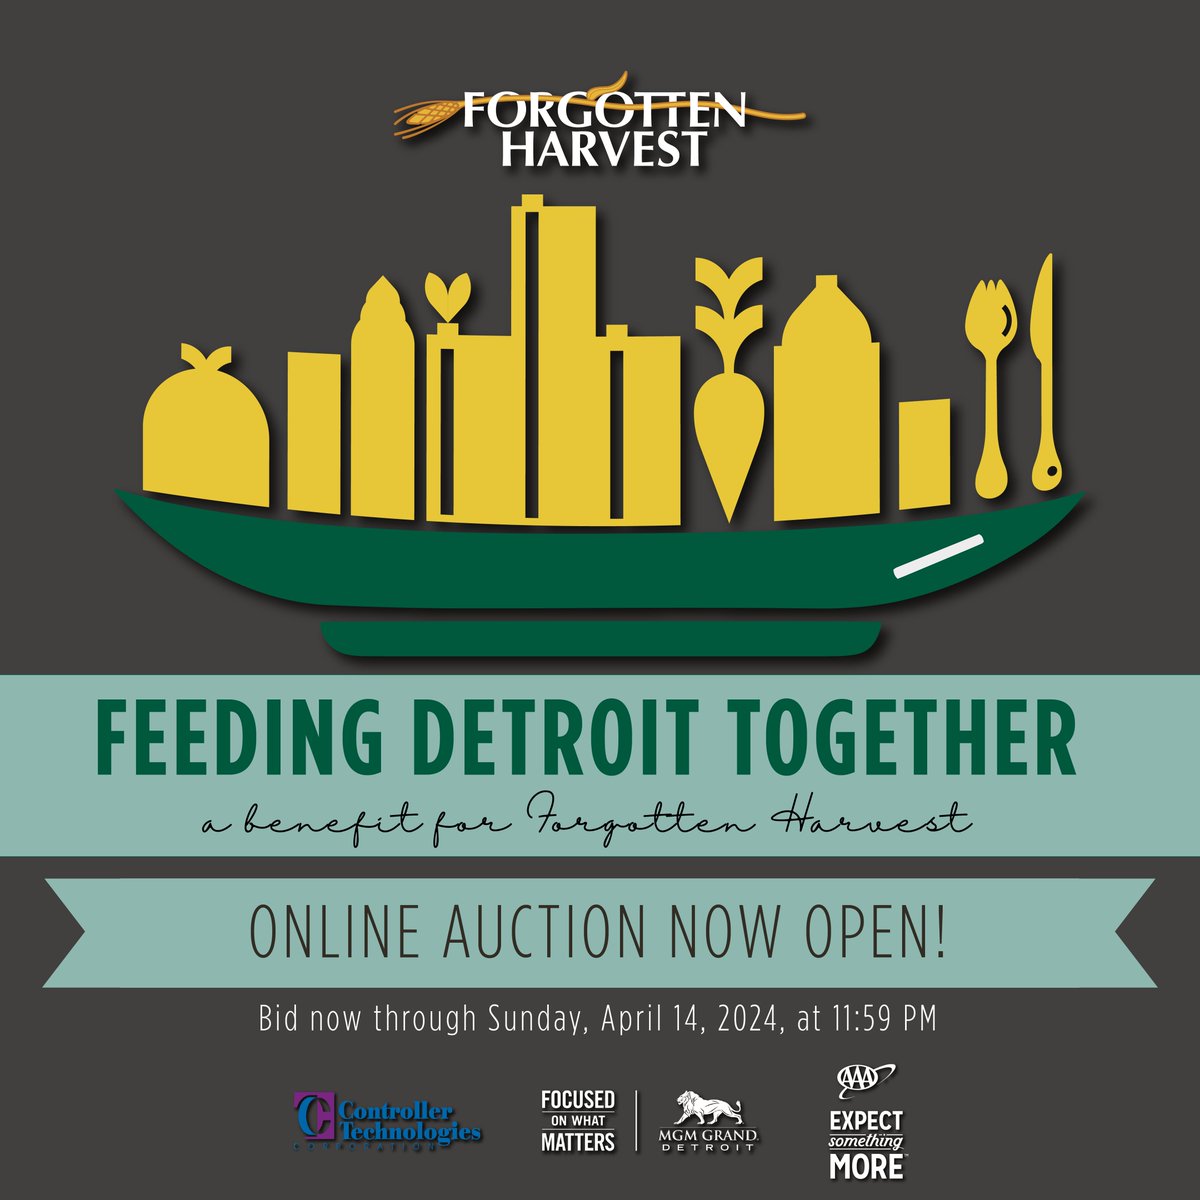 🚨TODAY IS THE LAST DAY!🚨 Get your bids in before 11:59 PM tonight! Included in our auction are unique packages of Detroit sports memorabilia, hot air balloon experiences, wine and dine packages, and more! View the full auction here: fdt2024.cbo.io